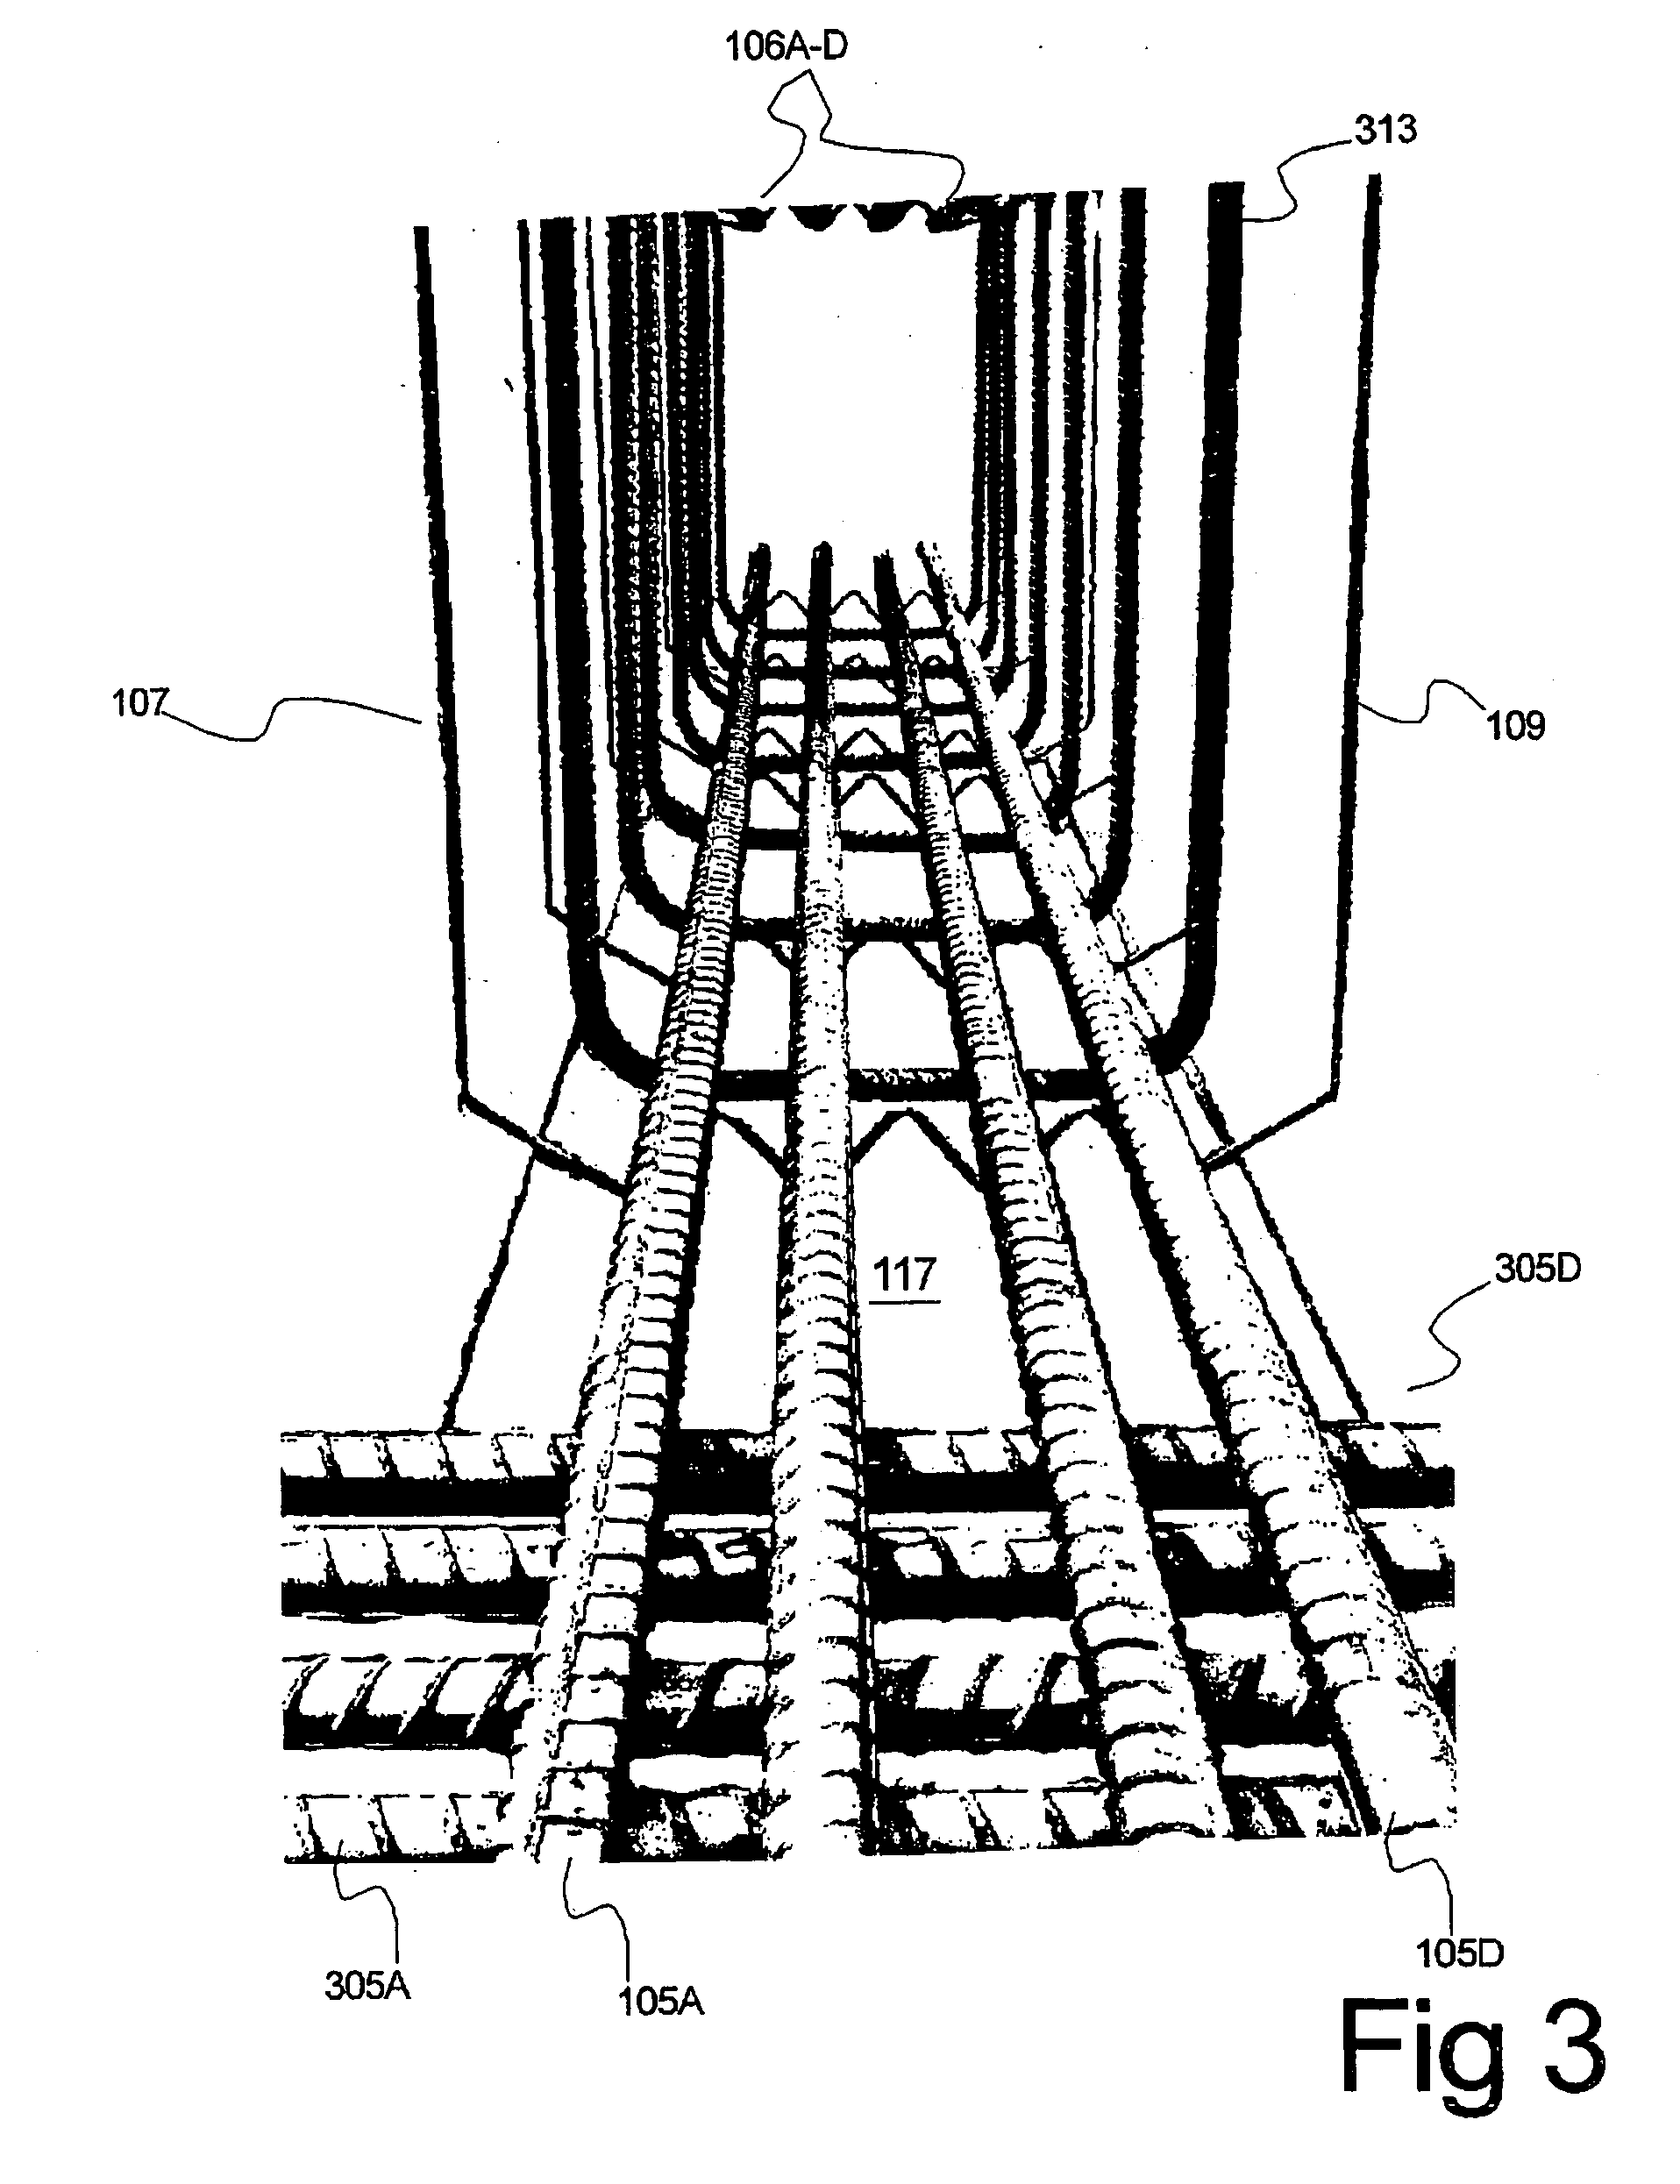 Components for use in large-scale concrete slab constructions